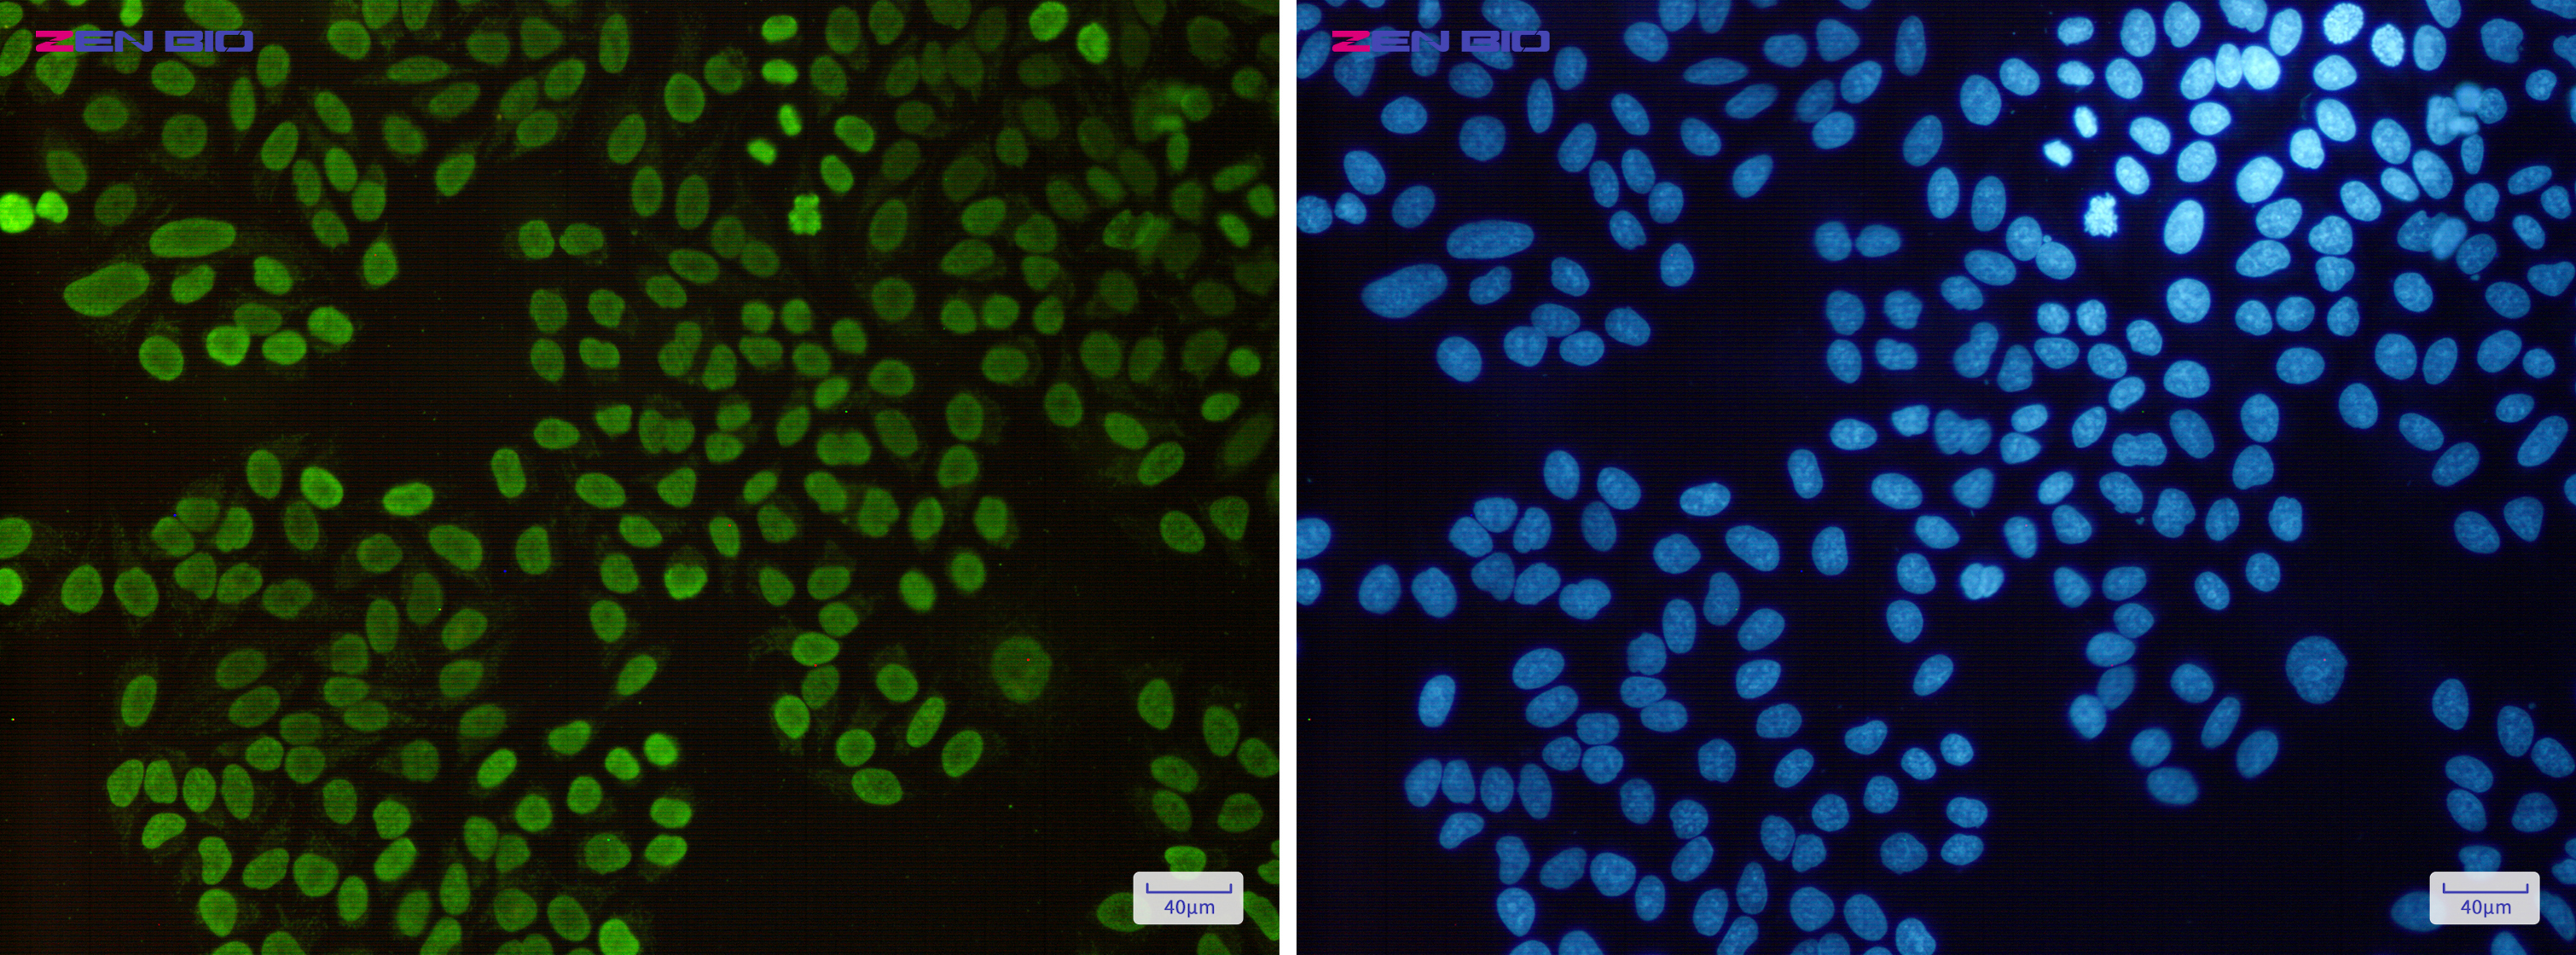 Immunocytochemistry of Histone H1.3(green) in Hela cells using Histone H1.3 Rabbit pAb at dilution 1/50, and DAPI(blue)